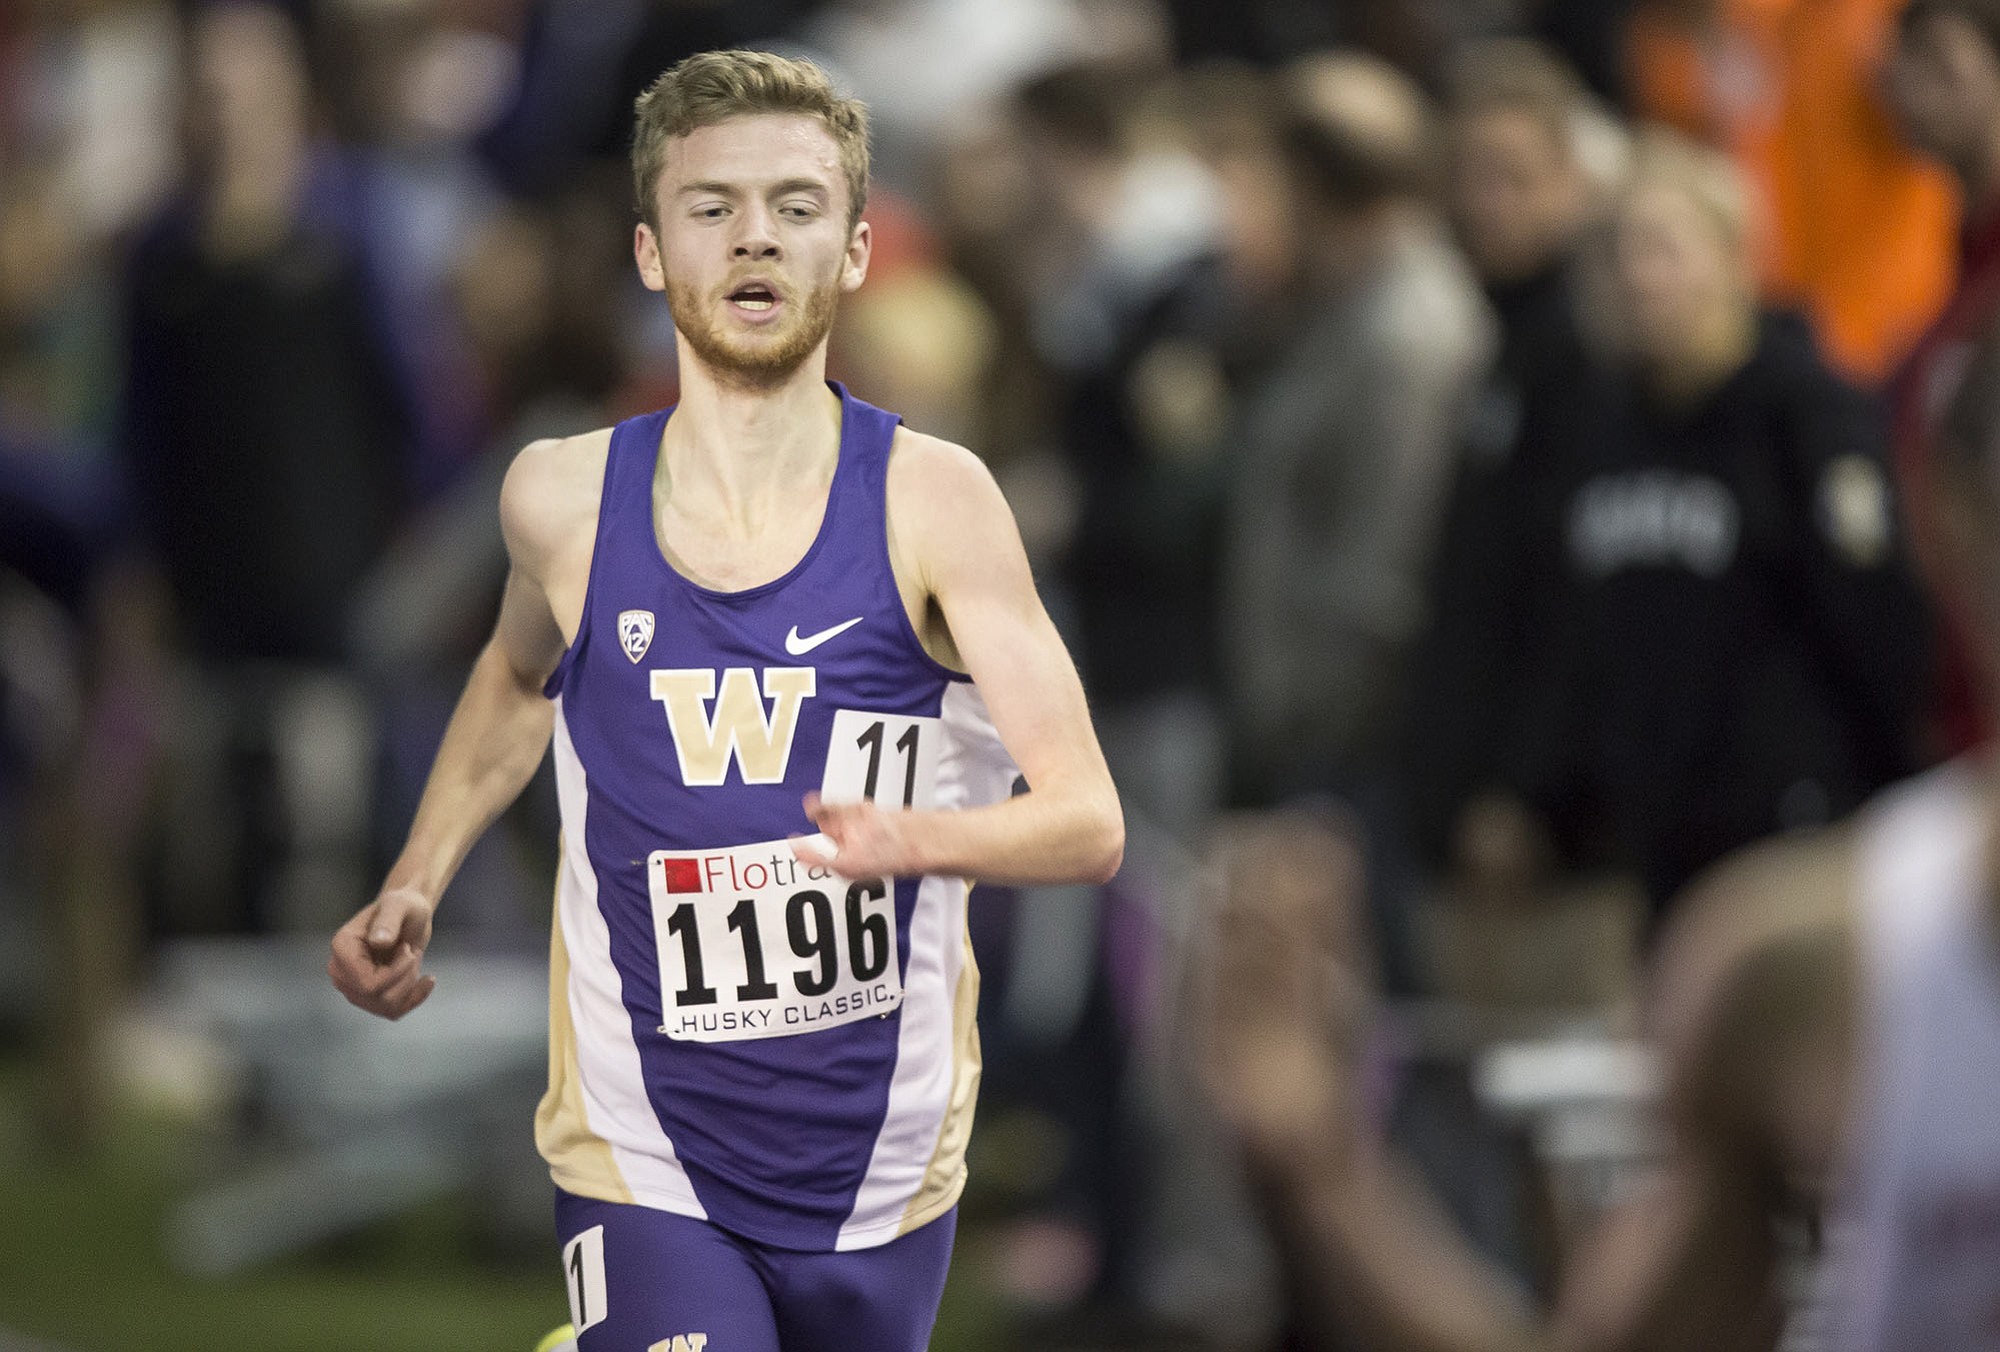 Colby Gilbert, University of Washington track and field.